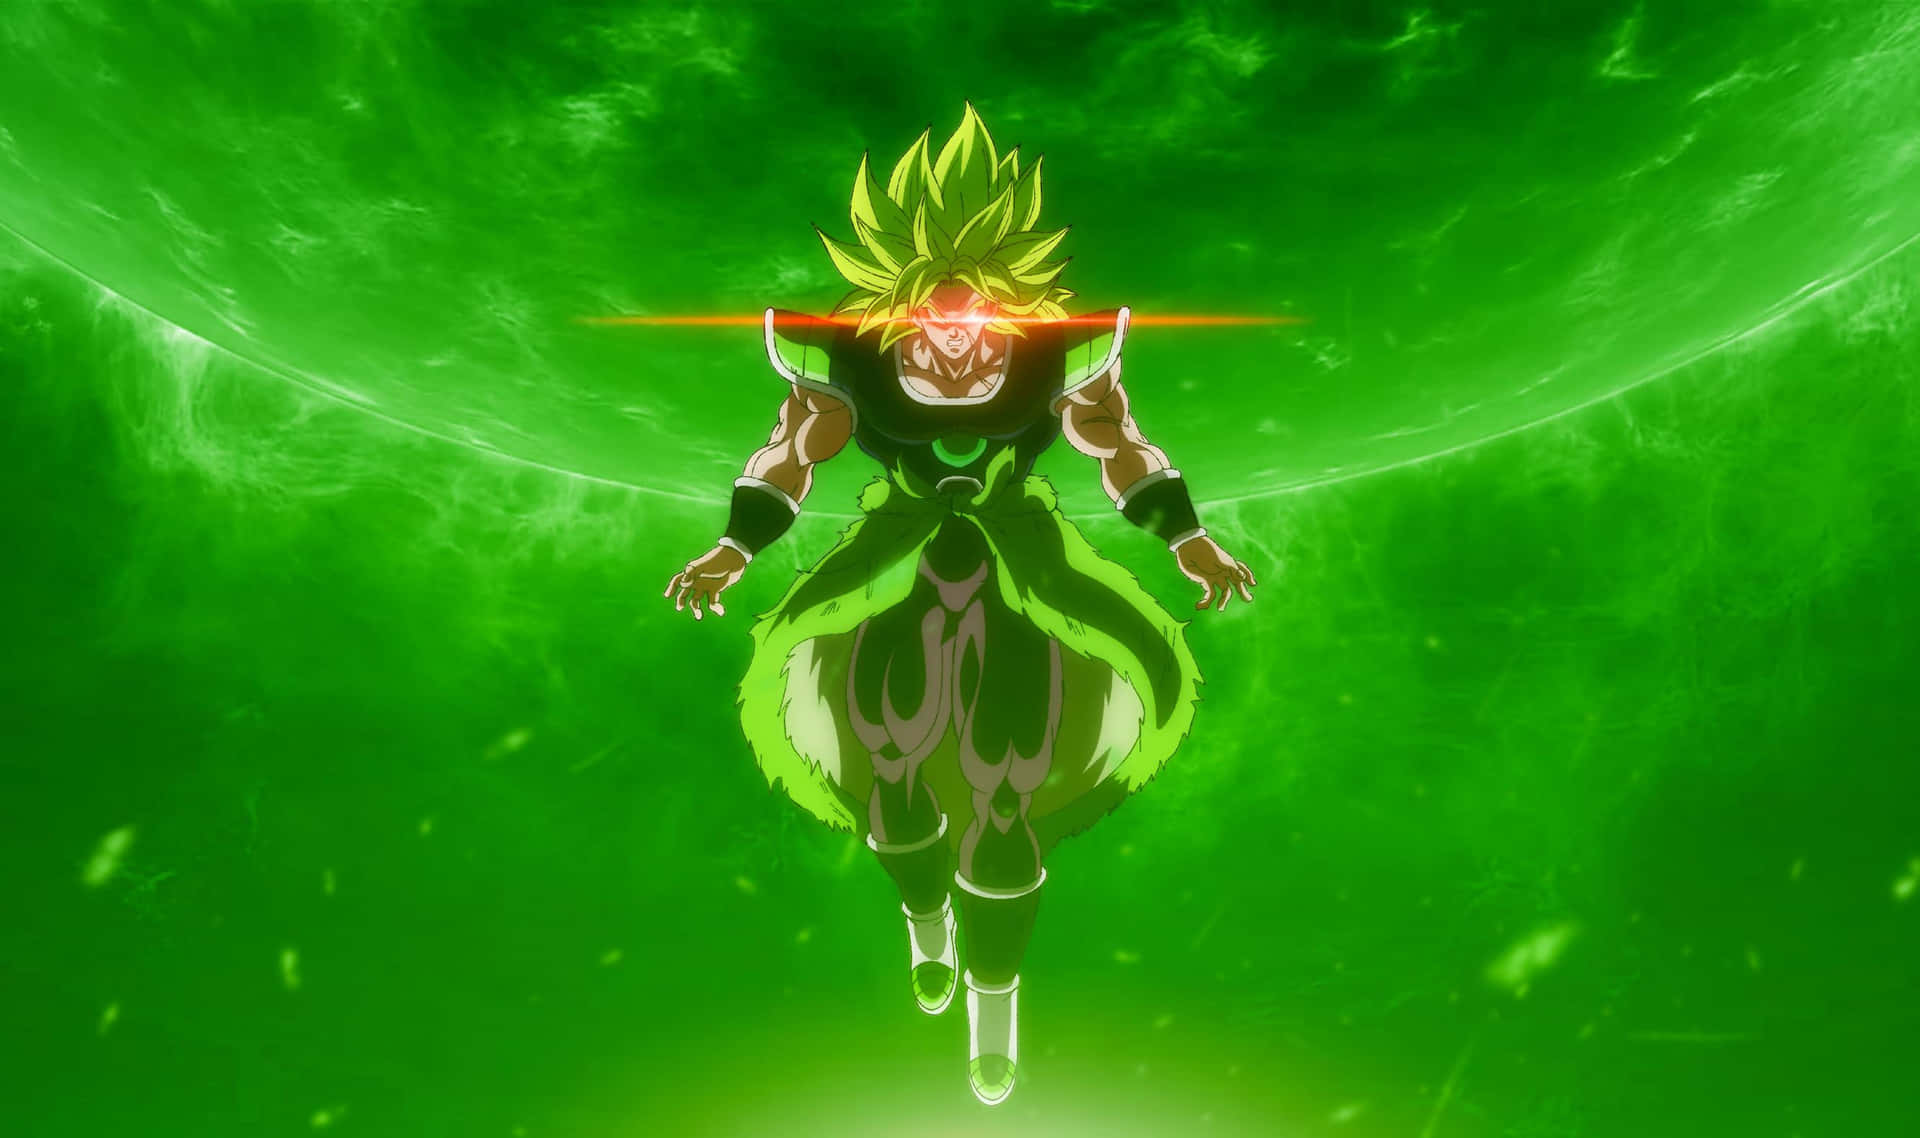 Unstoppable force of power - Broly in 4K Wallpaper